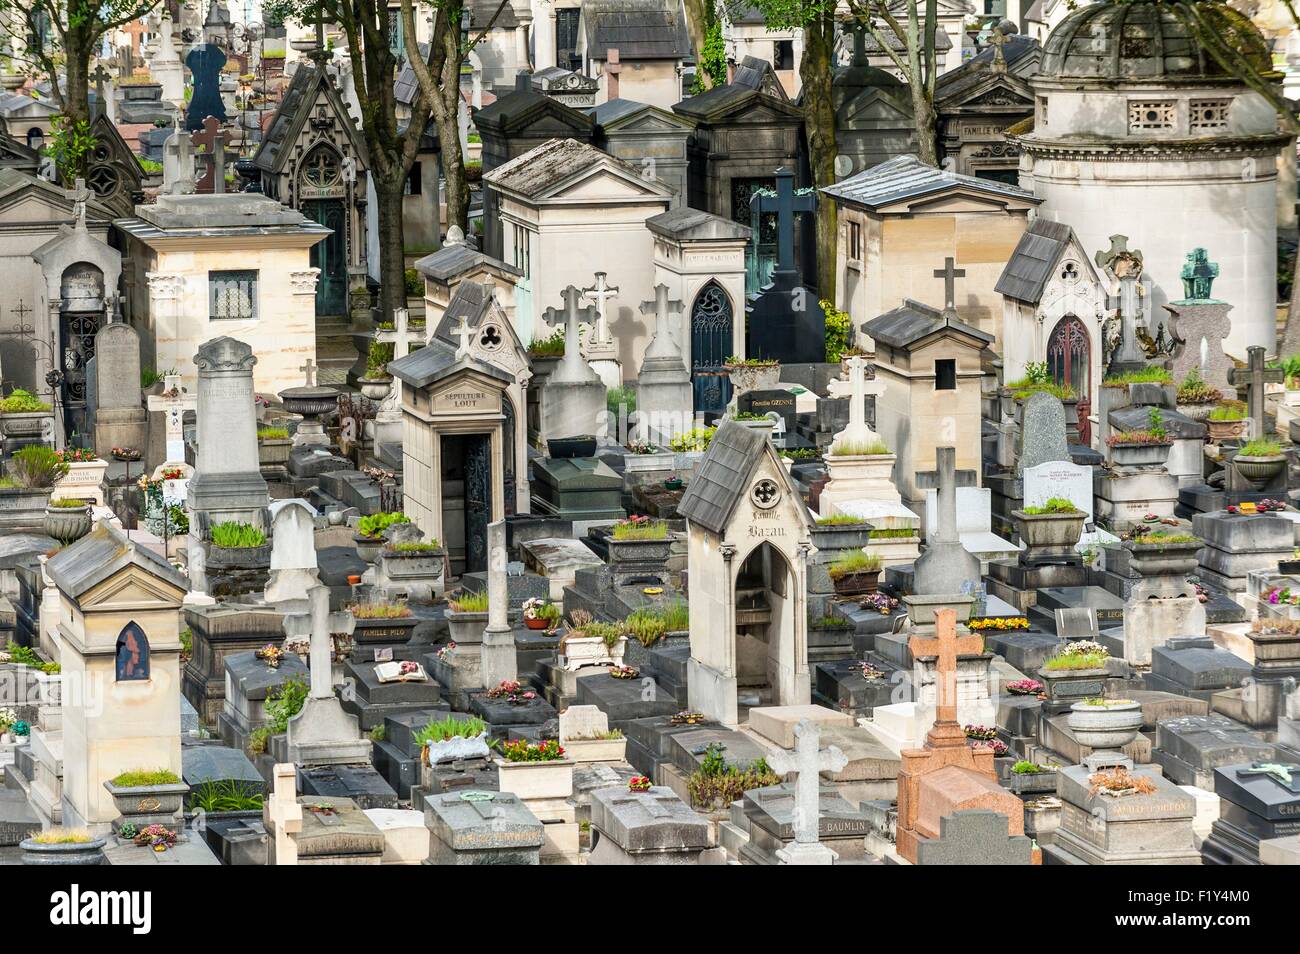 France, Paris, Pere Lachaise cemetery, graves around the crematorium at level of Rondeaux street Stock Photo